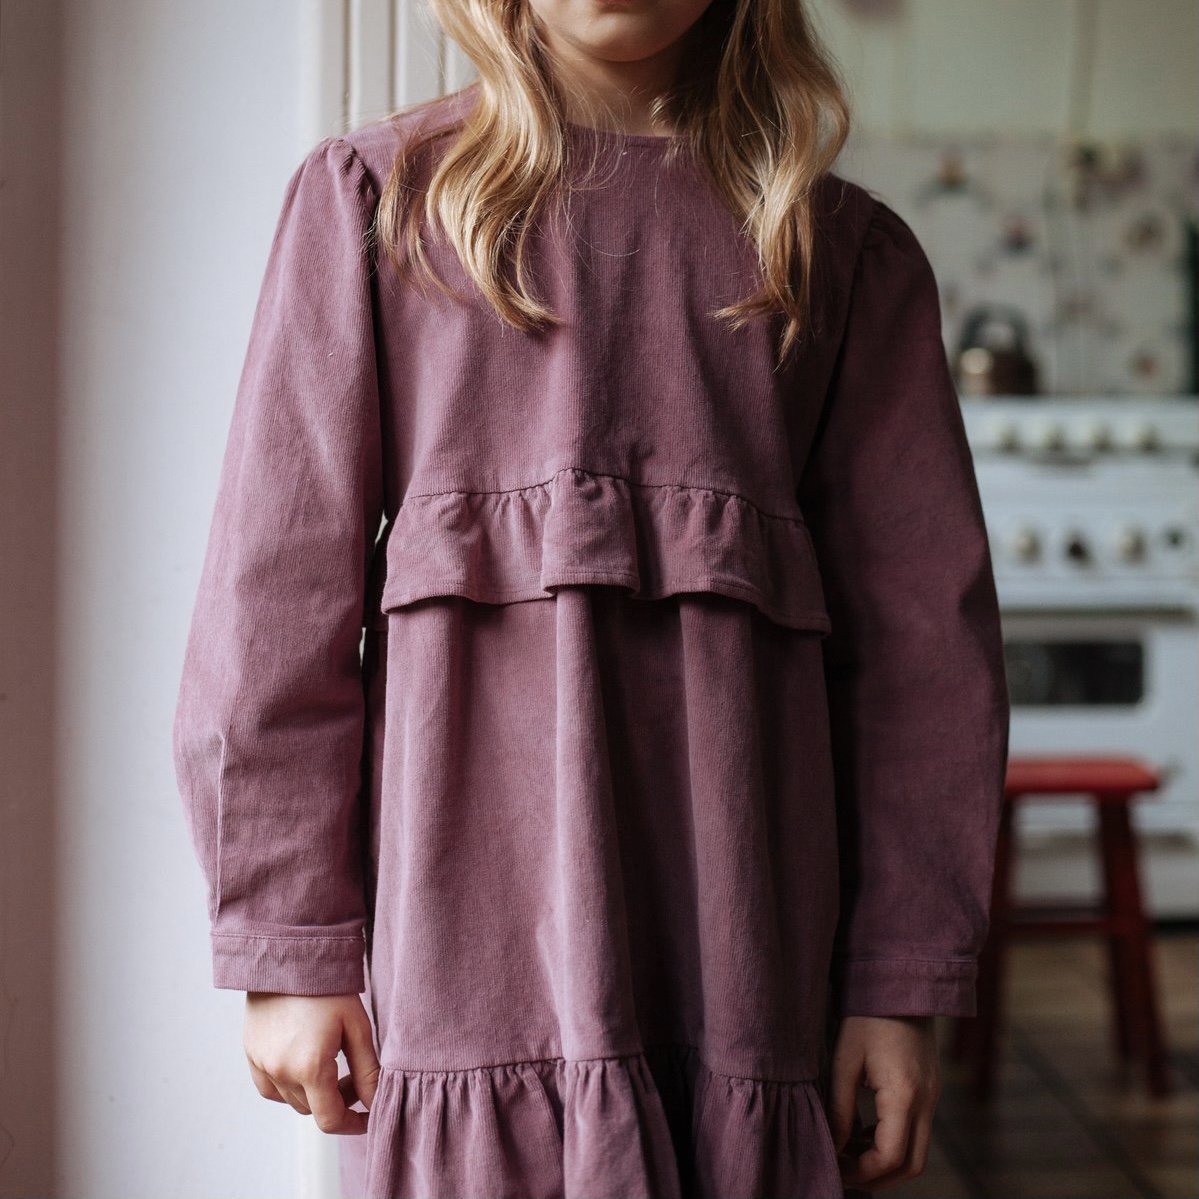 Mila Corduroy Dress find Stylish Fashion for Little People- at Little Foxx Concept Store